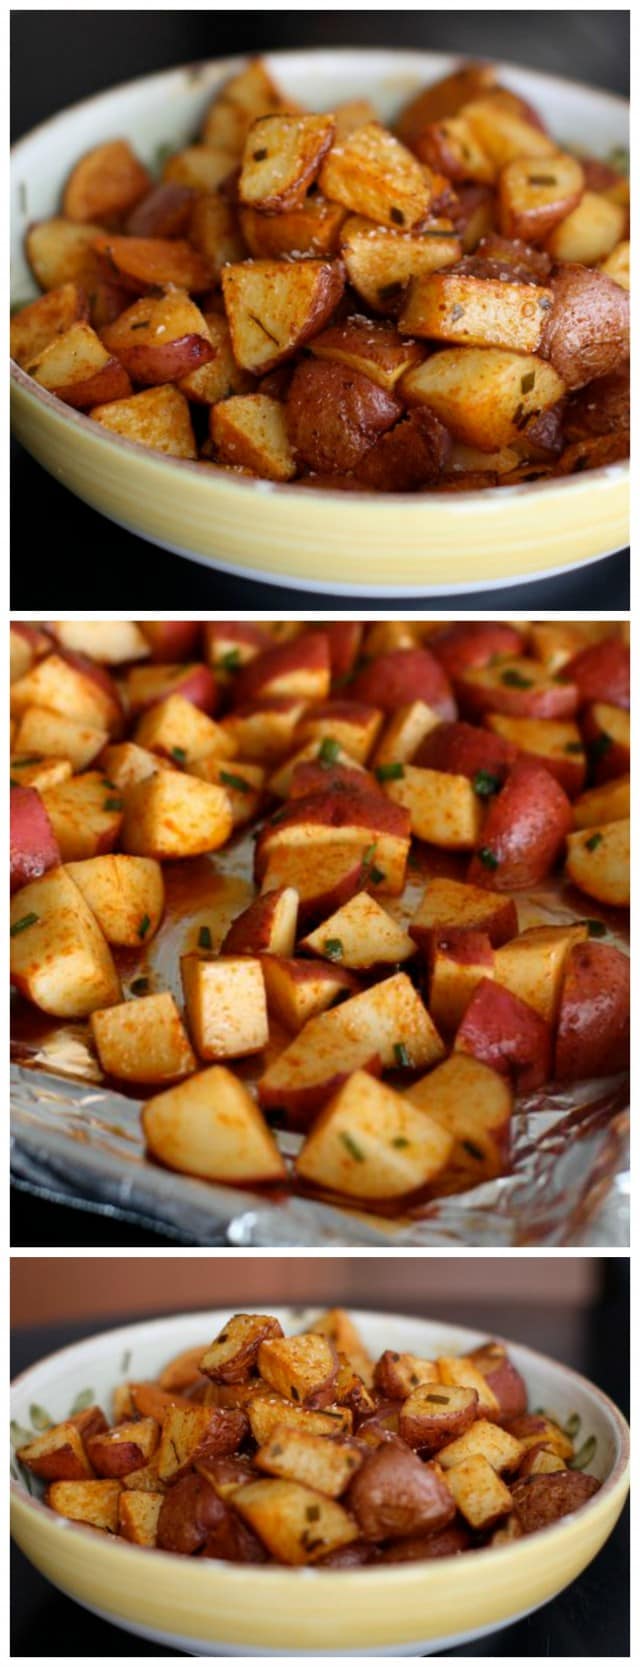 Roasted Red Potatoes with Smoked Paprika make a simple and healthy side dish to add to any meal.